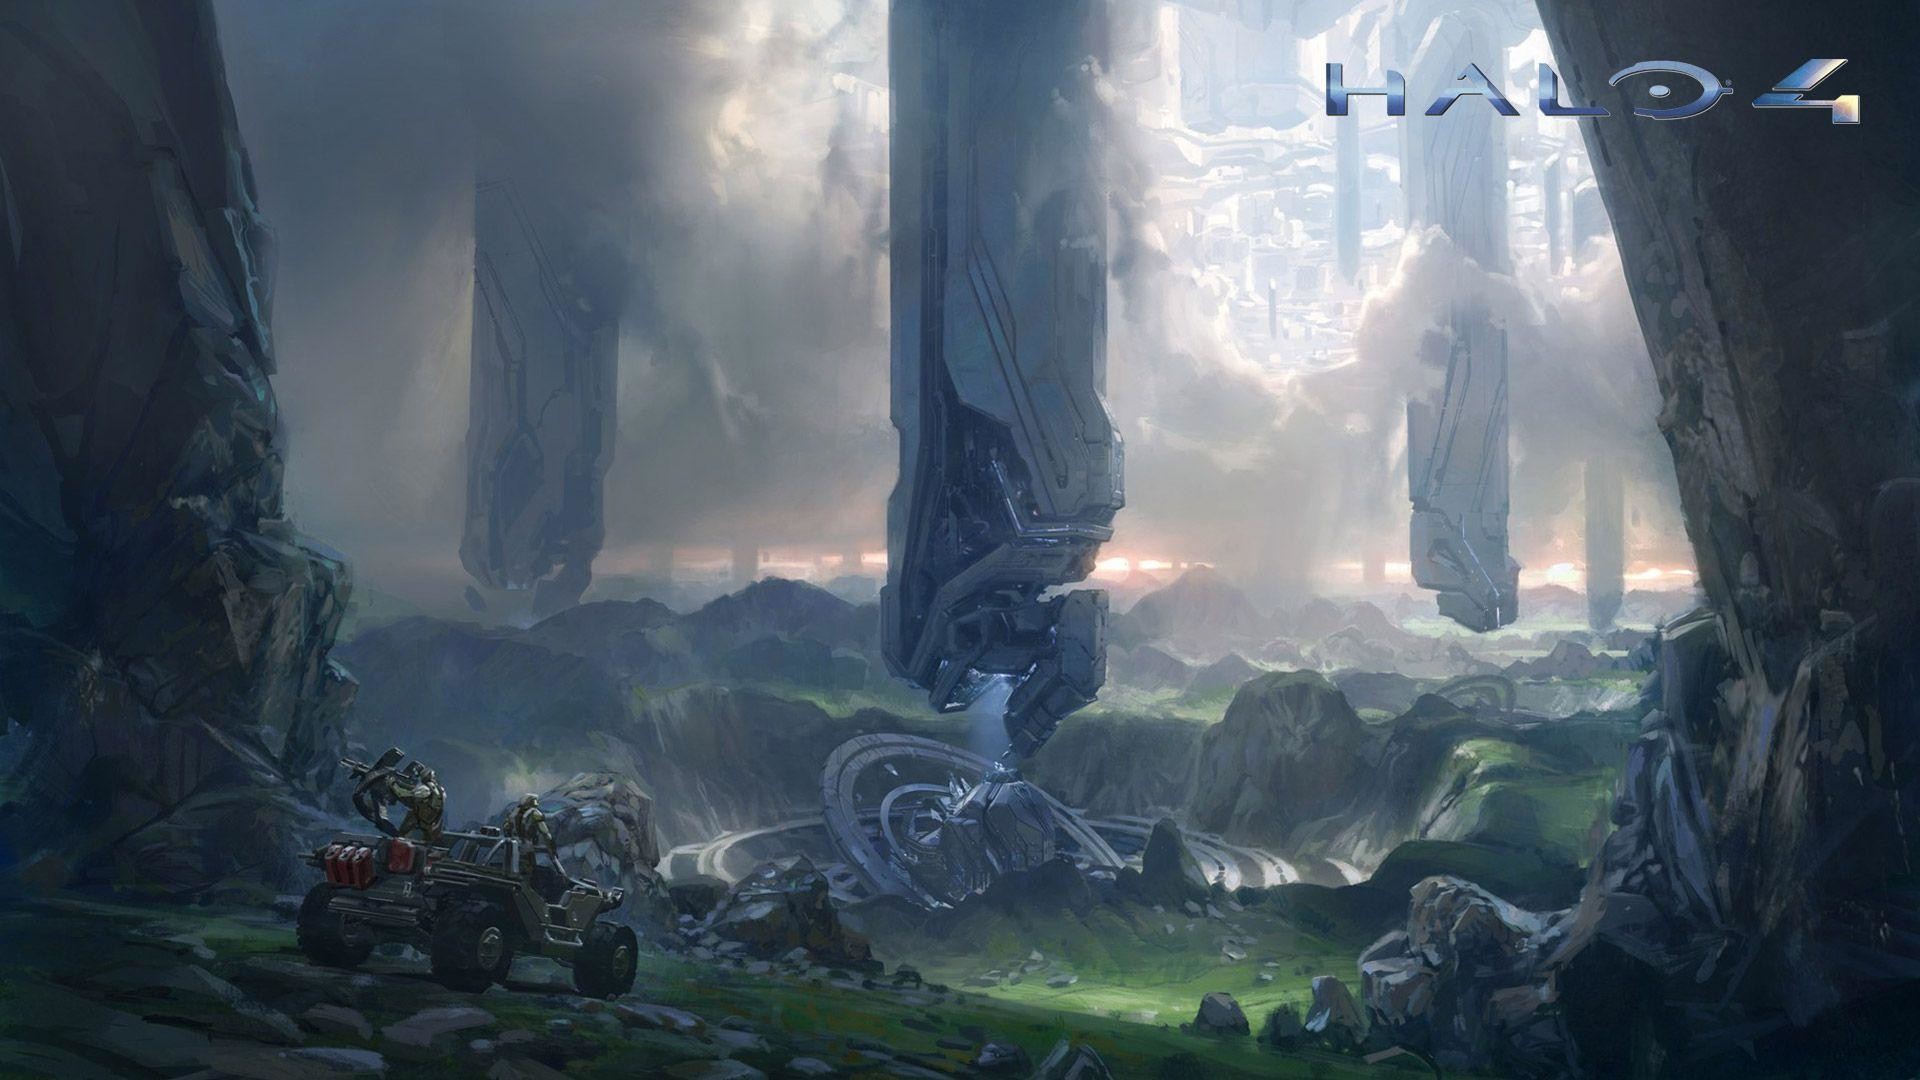 1920x1080 Halo 4 Game Cover Wallpaper